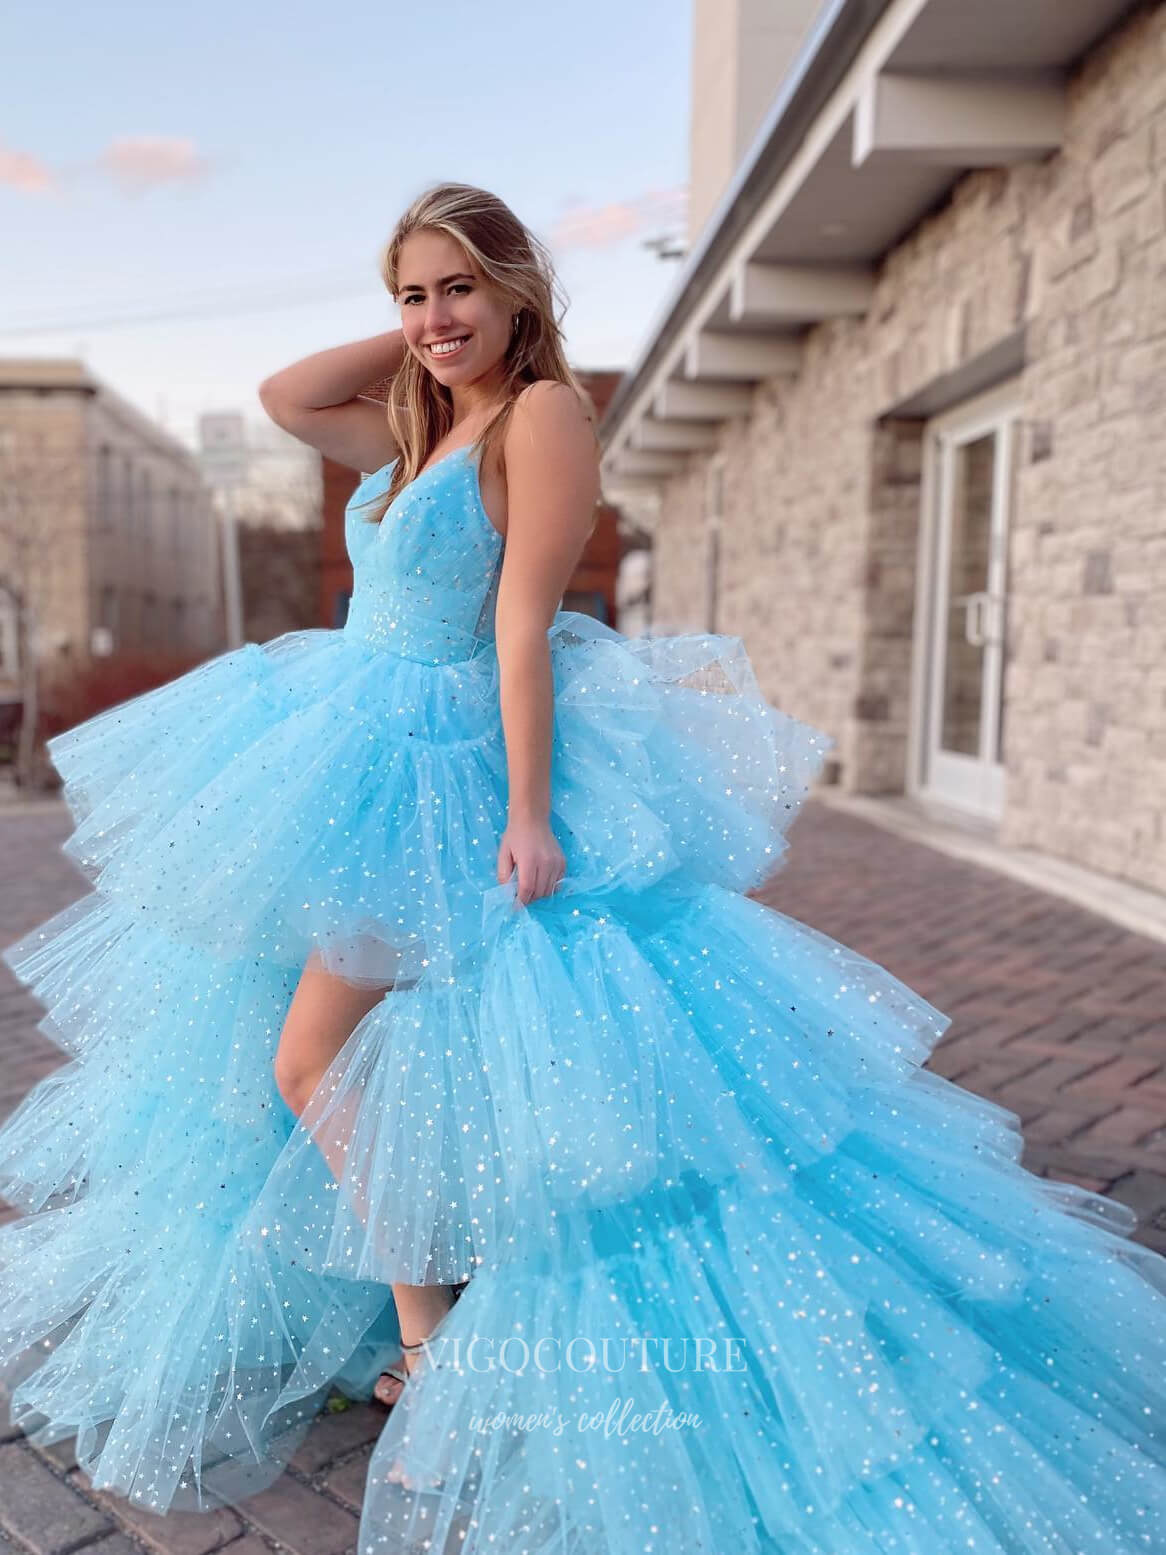 Ivory High Low Ruffled Prom Dresses Sparkly Tulle Spaghetti Strap Evening Dress 21718-Prom Dresses-vigocouture-Light Blue-US2-vigocouture